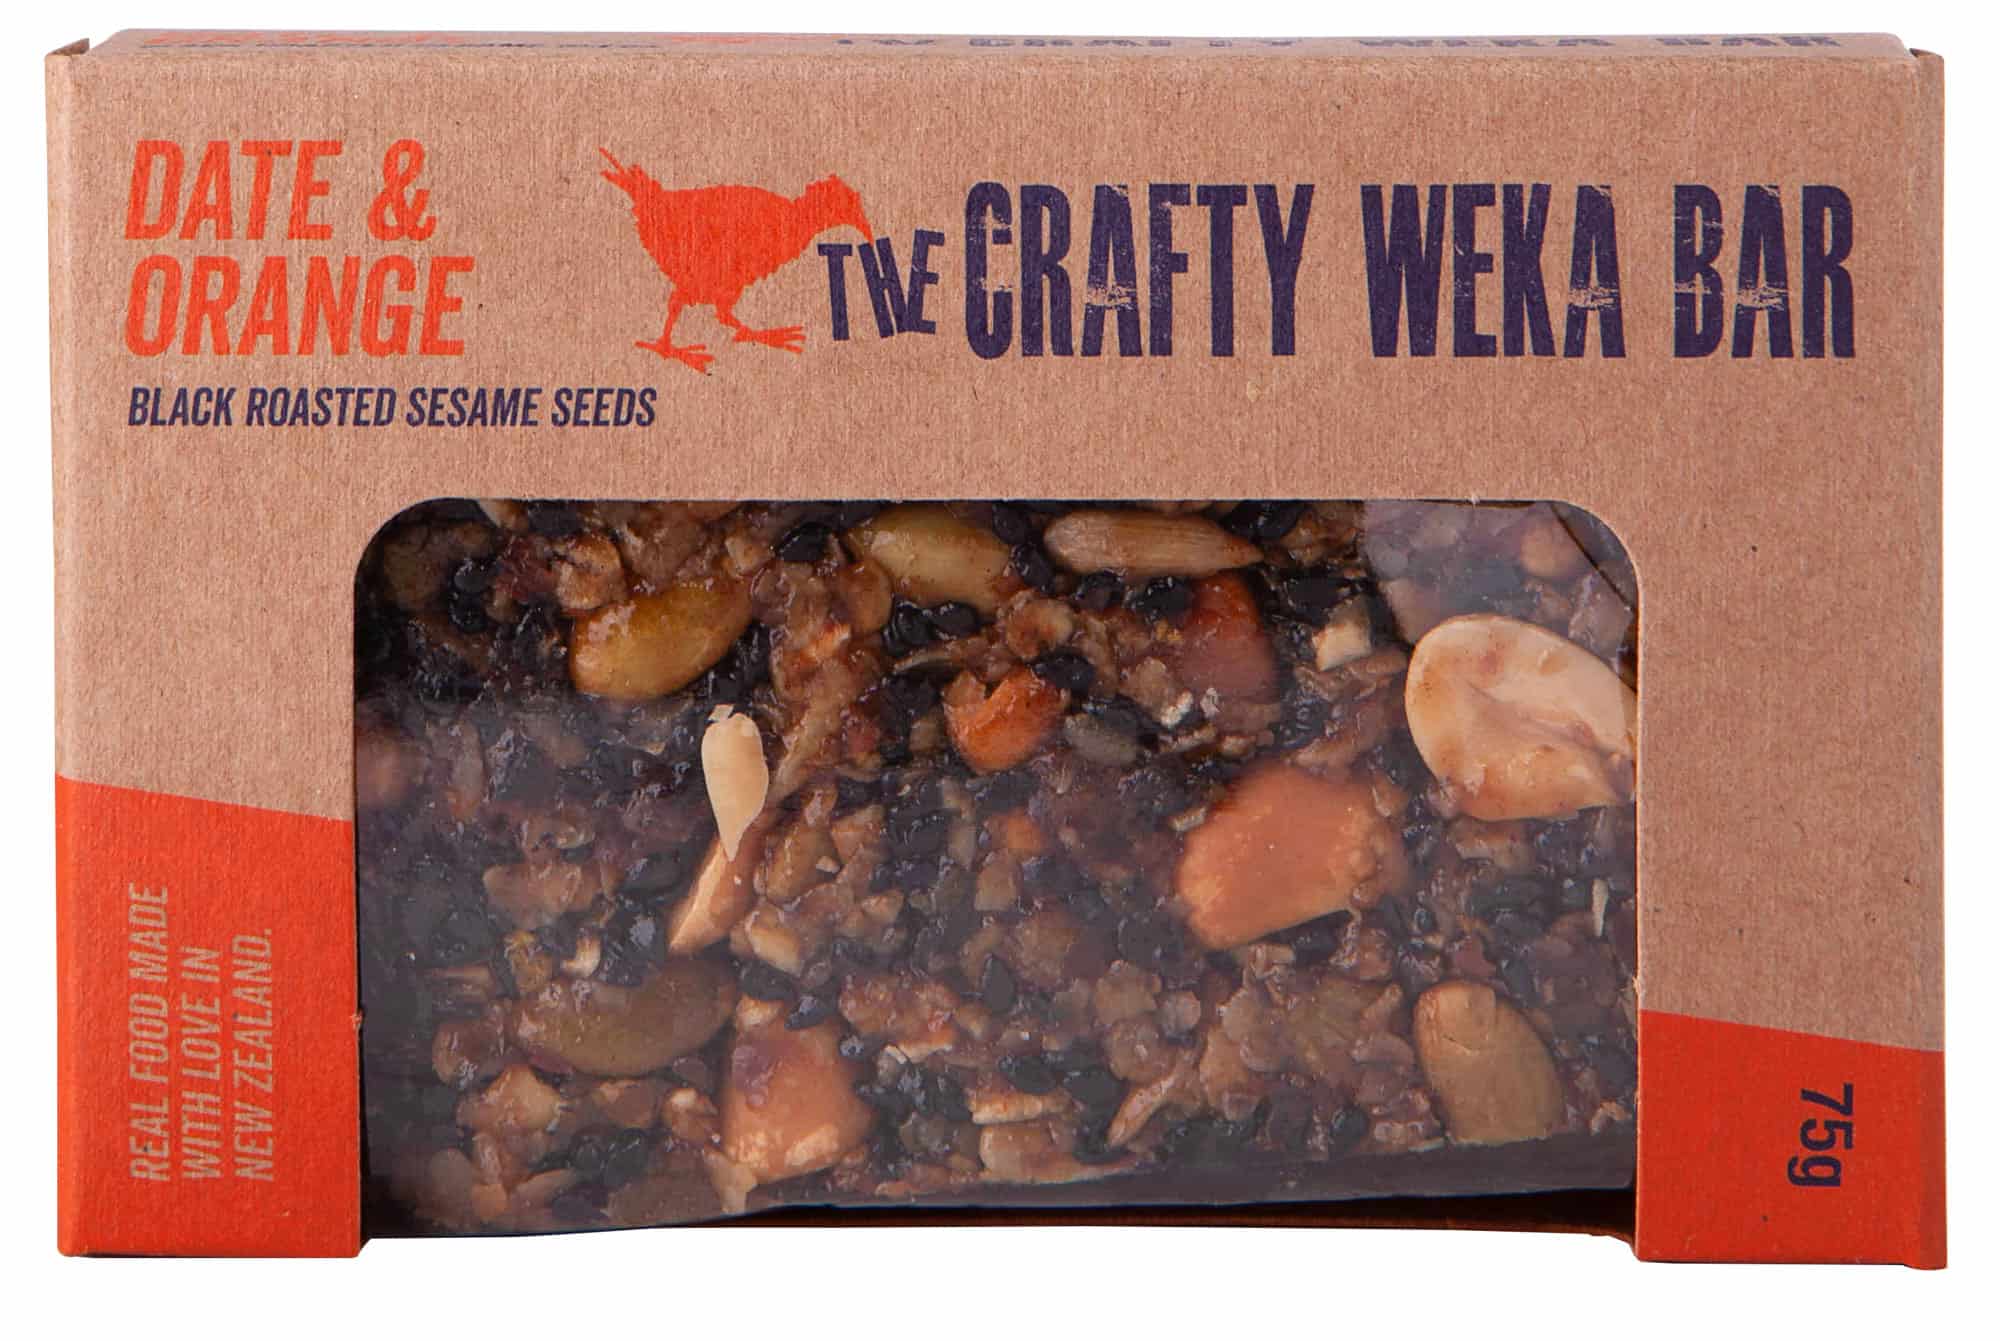 The Crafty Weka Bar Date & Orange Bar - Tramping Food and Accessories sold by Venture Outdoors NZ